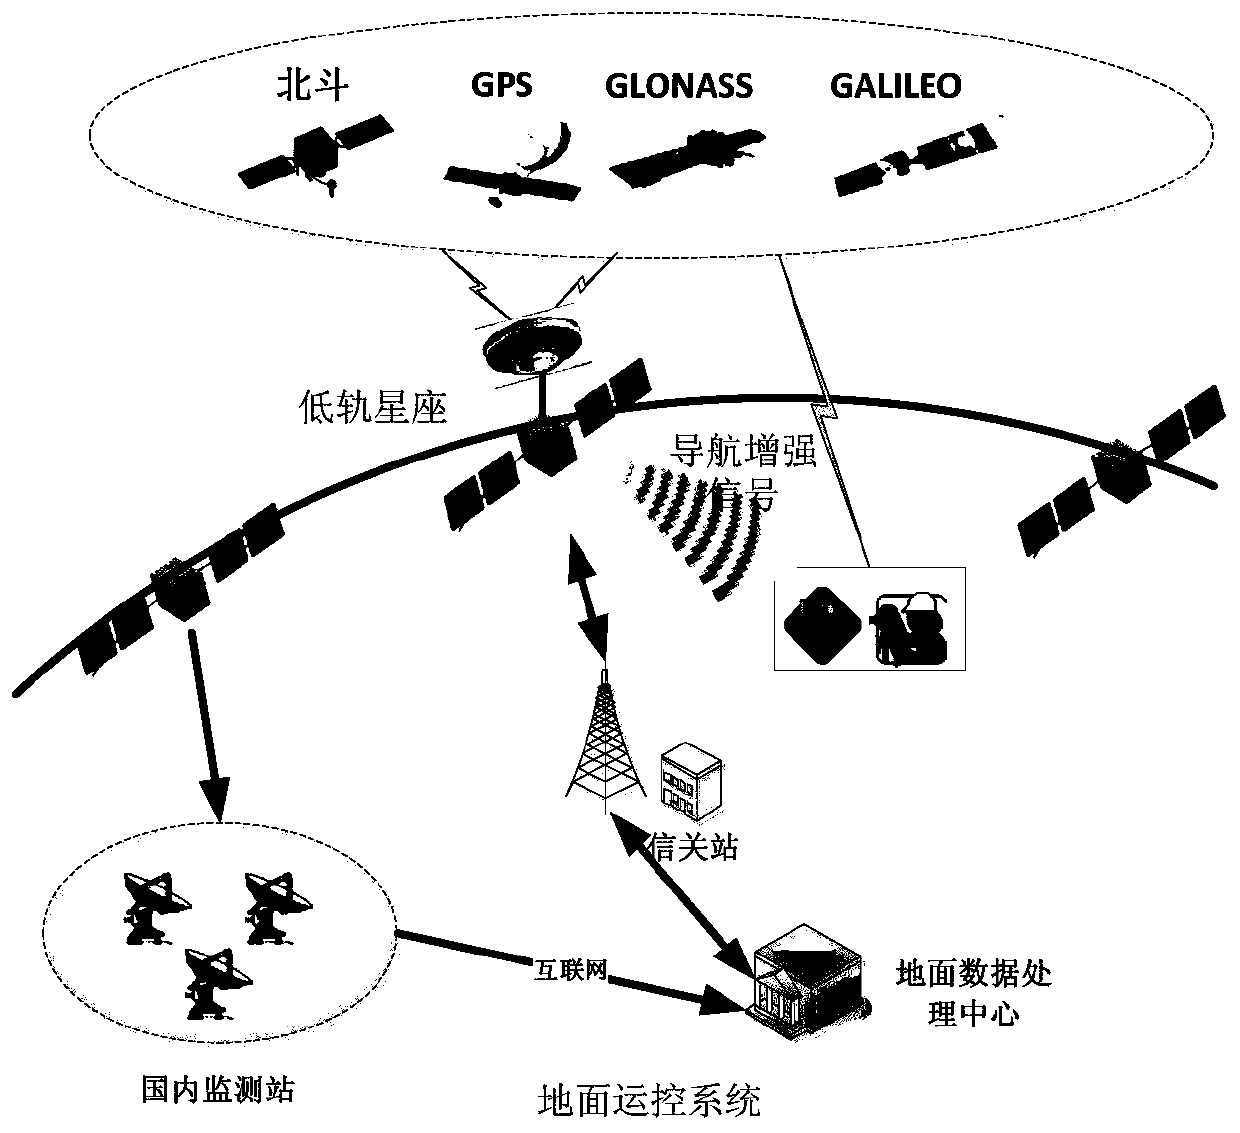 Navigation enhancement system based on low-orbit constellation monitoring GNSS signals and broadcasting GNSS frequency band navigation enhancement signals